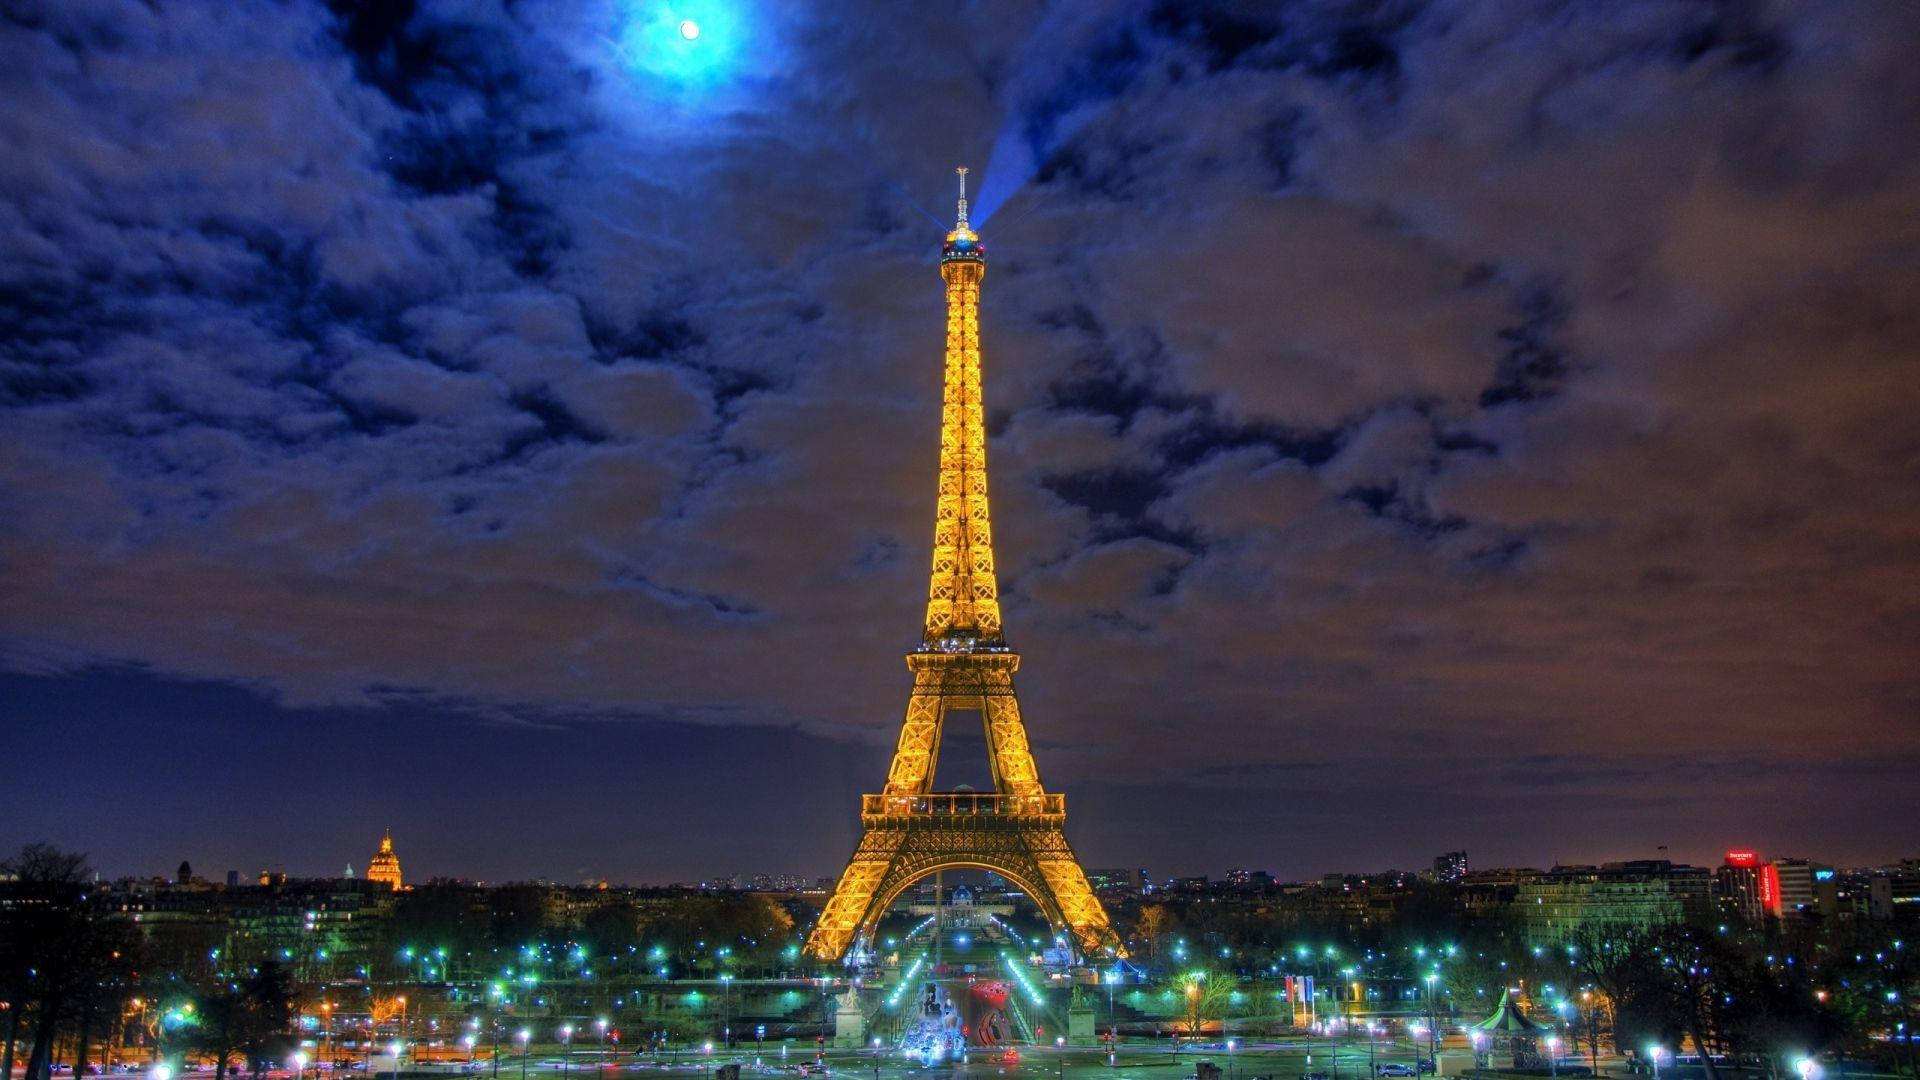 Eiffel Tower Pictures